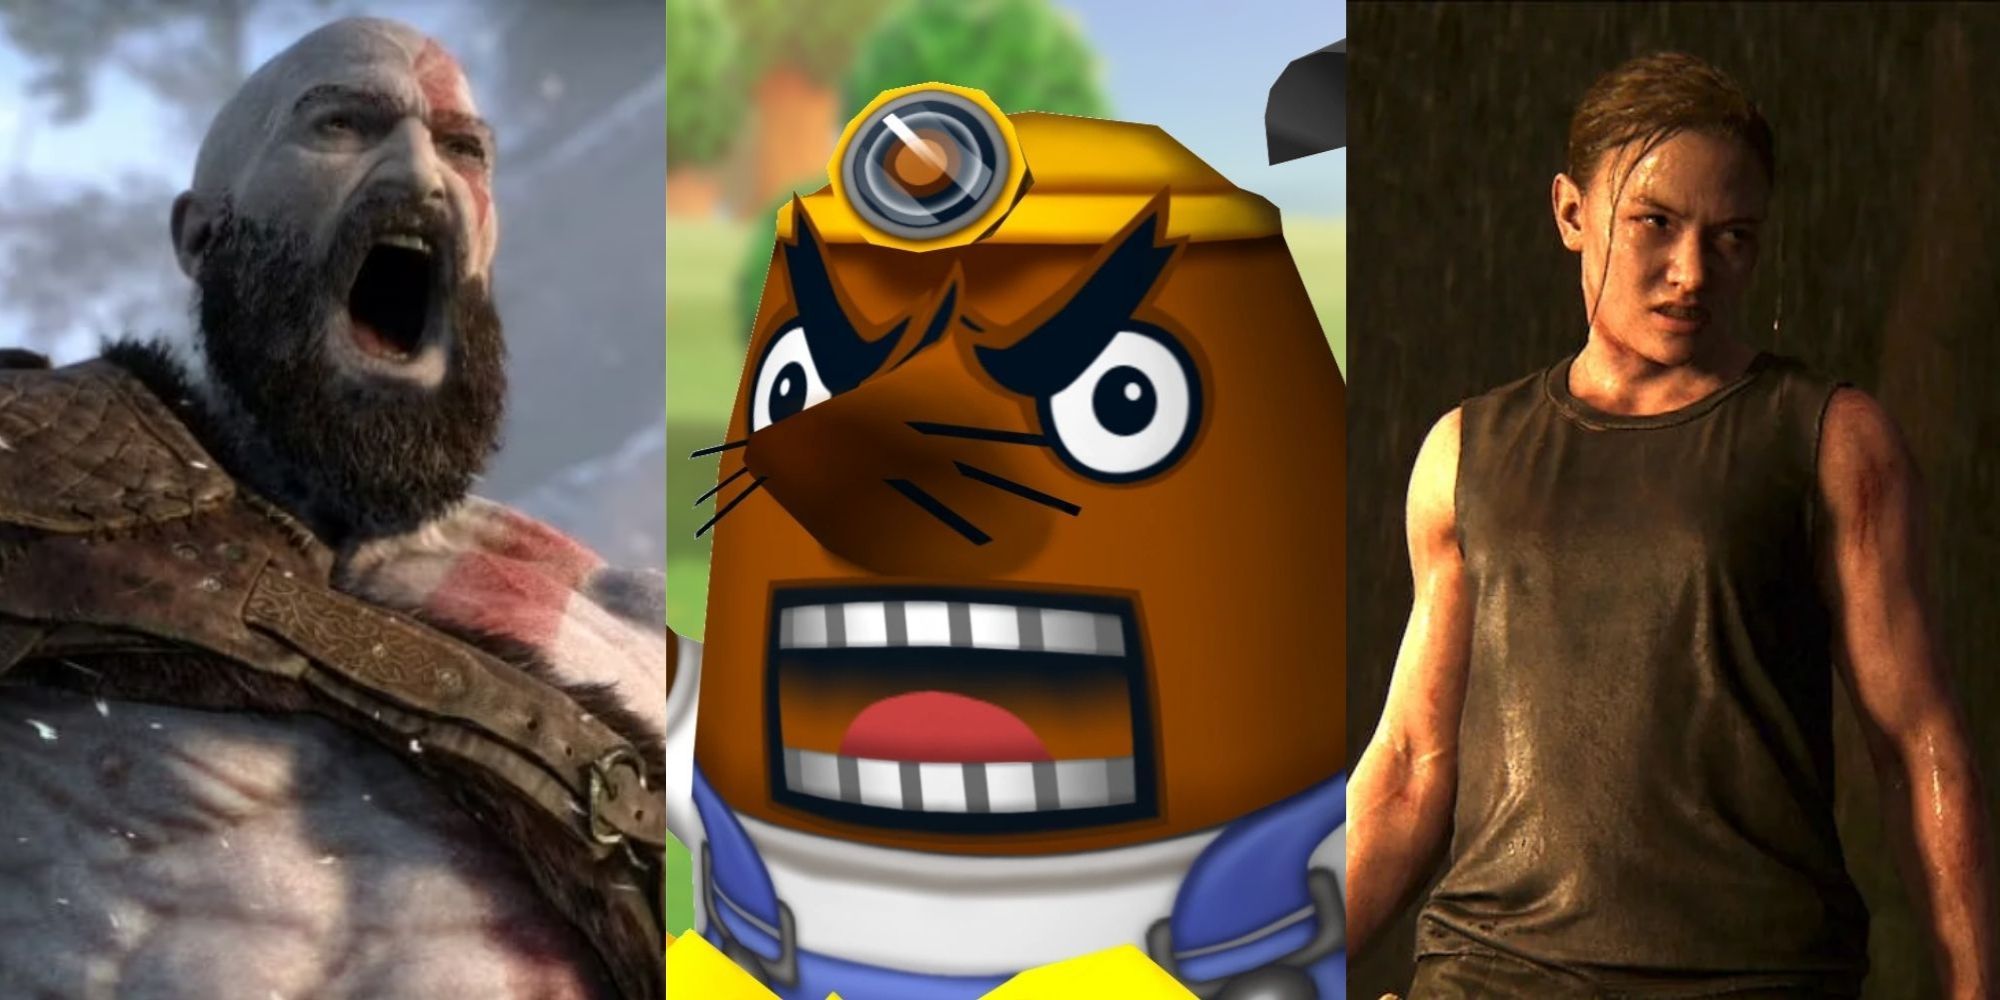 Kratos from God of War, Resetti from Animal Crossing, Abby from Last of Us